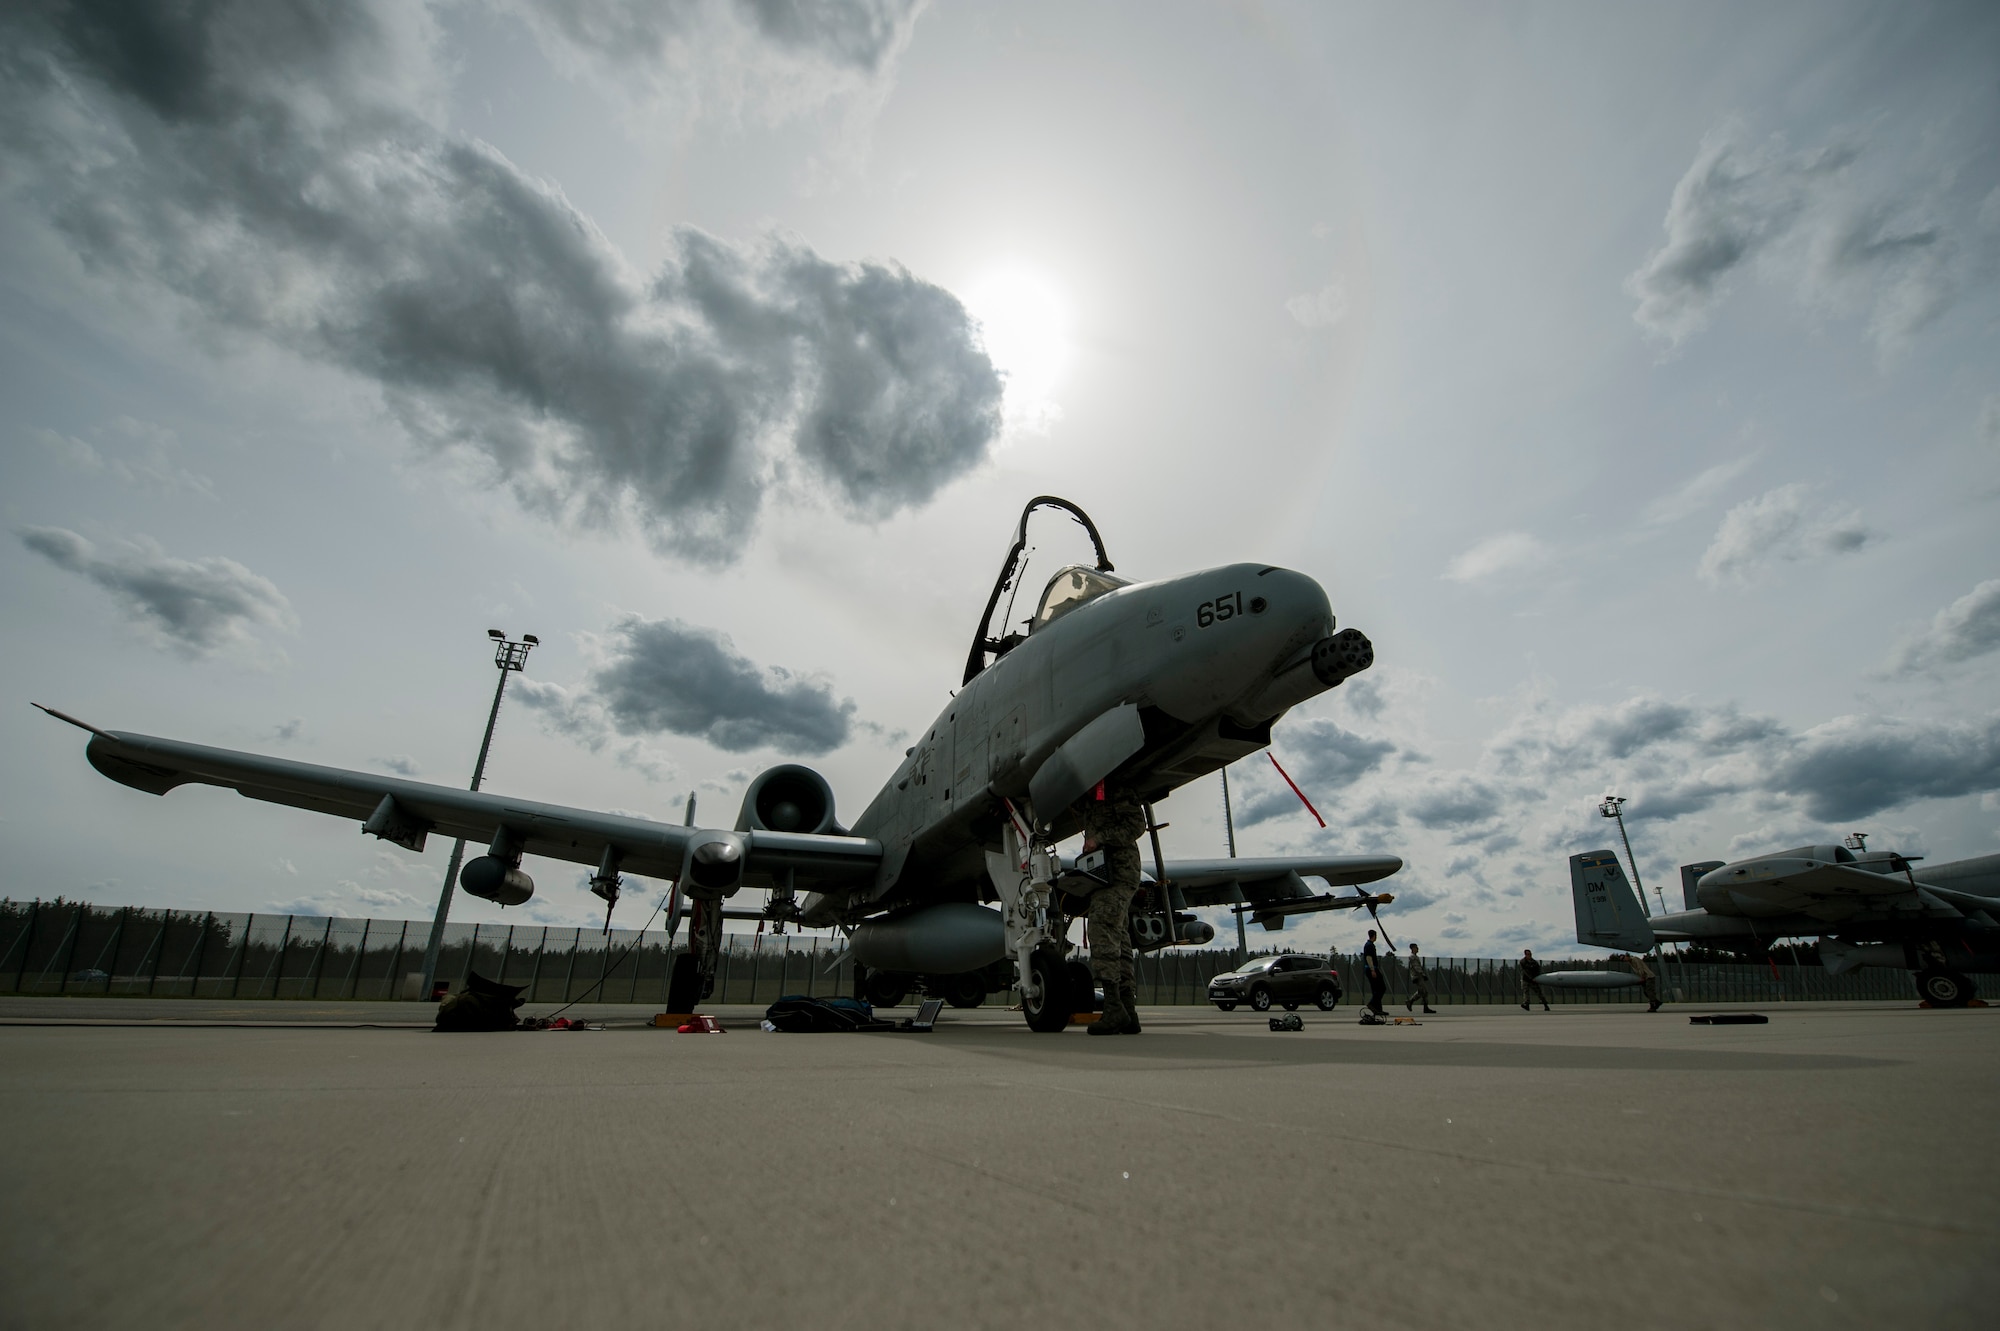 A member of the 354th Expeditionary Fighter Squadron performs a post-flight inspection on an A-10 Thunderbolt II attack aircraft May 1, 2015, at Ämari Air Base, Estonia. The U.S. is committed to acting collectively with NATO allies and the international community to address security challenges in Europe and around the world. (U.S. Air Force photo by Senior Airman Rusty Frank/Released)